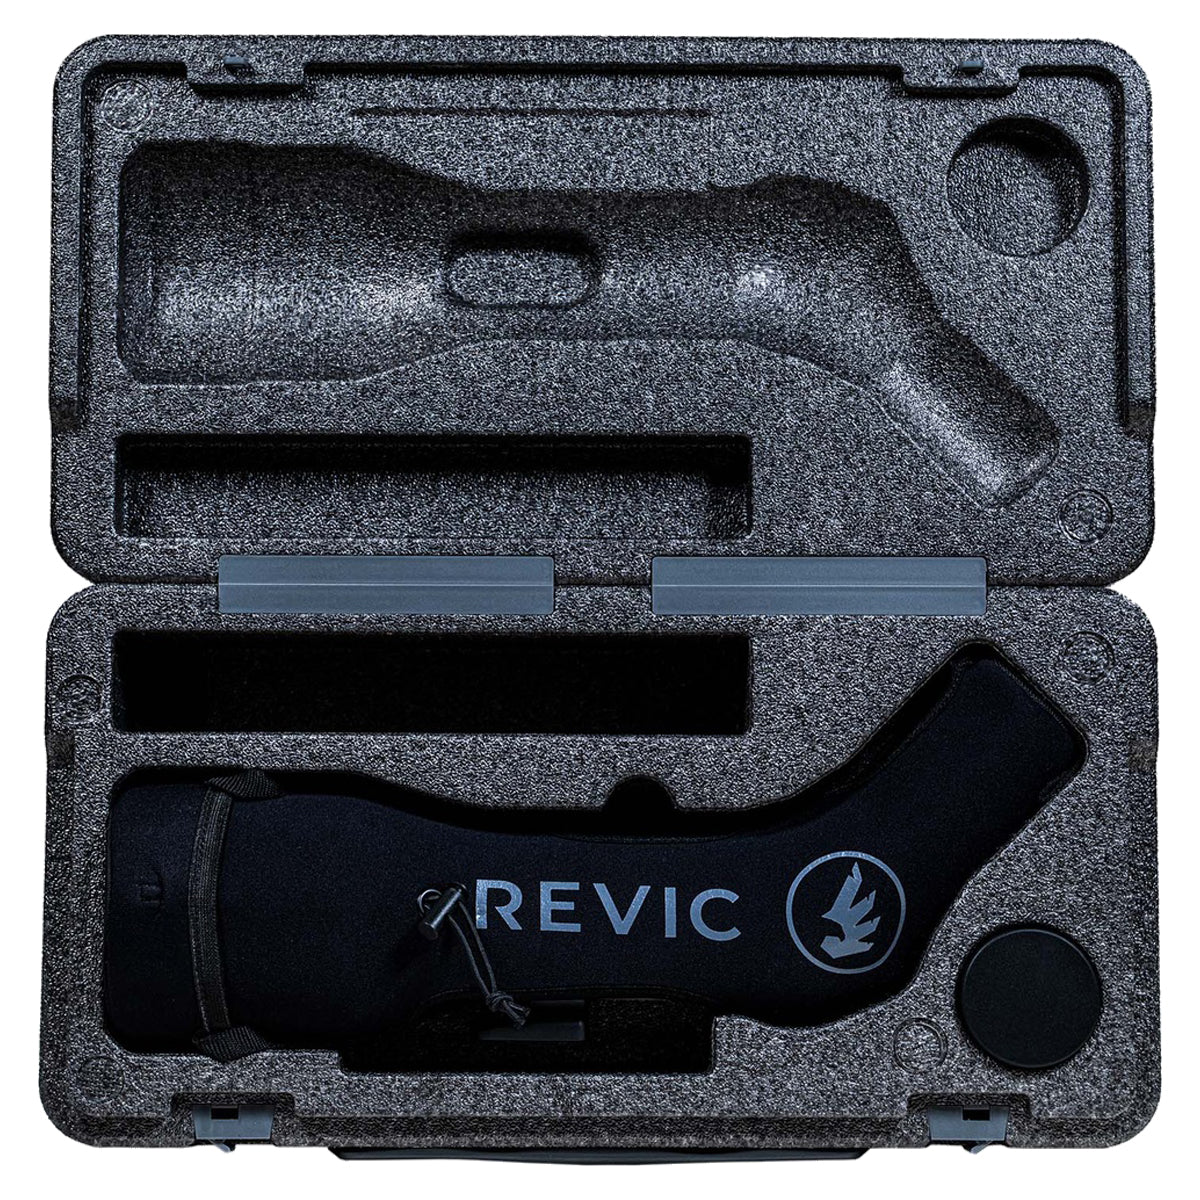 Revic Acura S80a Angled Spotting Scope in  by GOHUNT | Revic - GOHUNT Shop